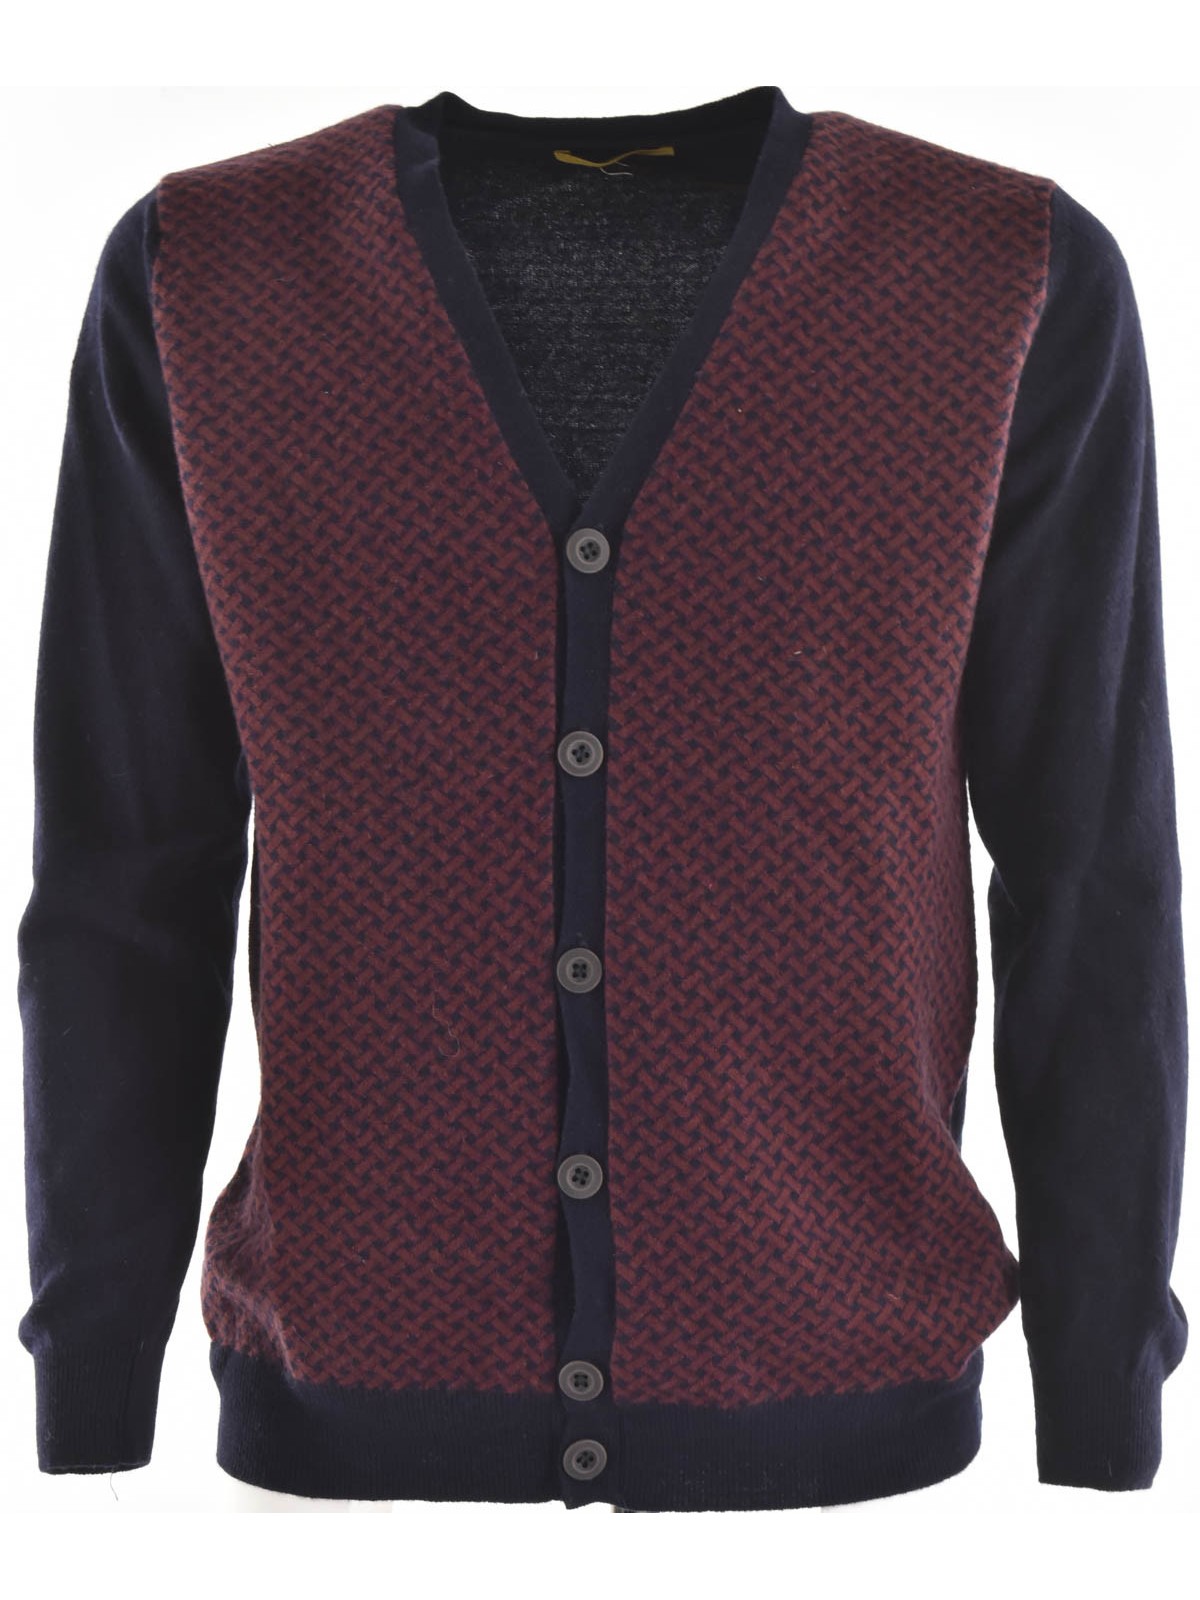 Men's Buttoned Sweater V-Neck Cardigan Geometric Pattern Buttons